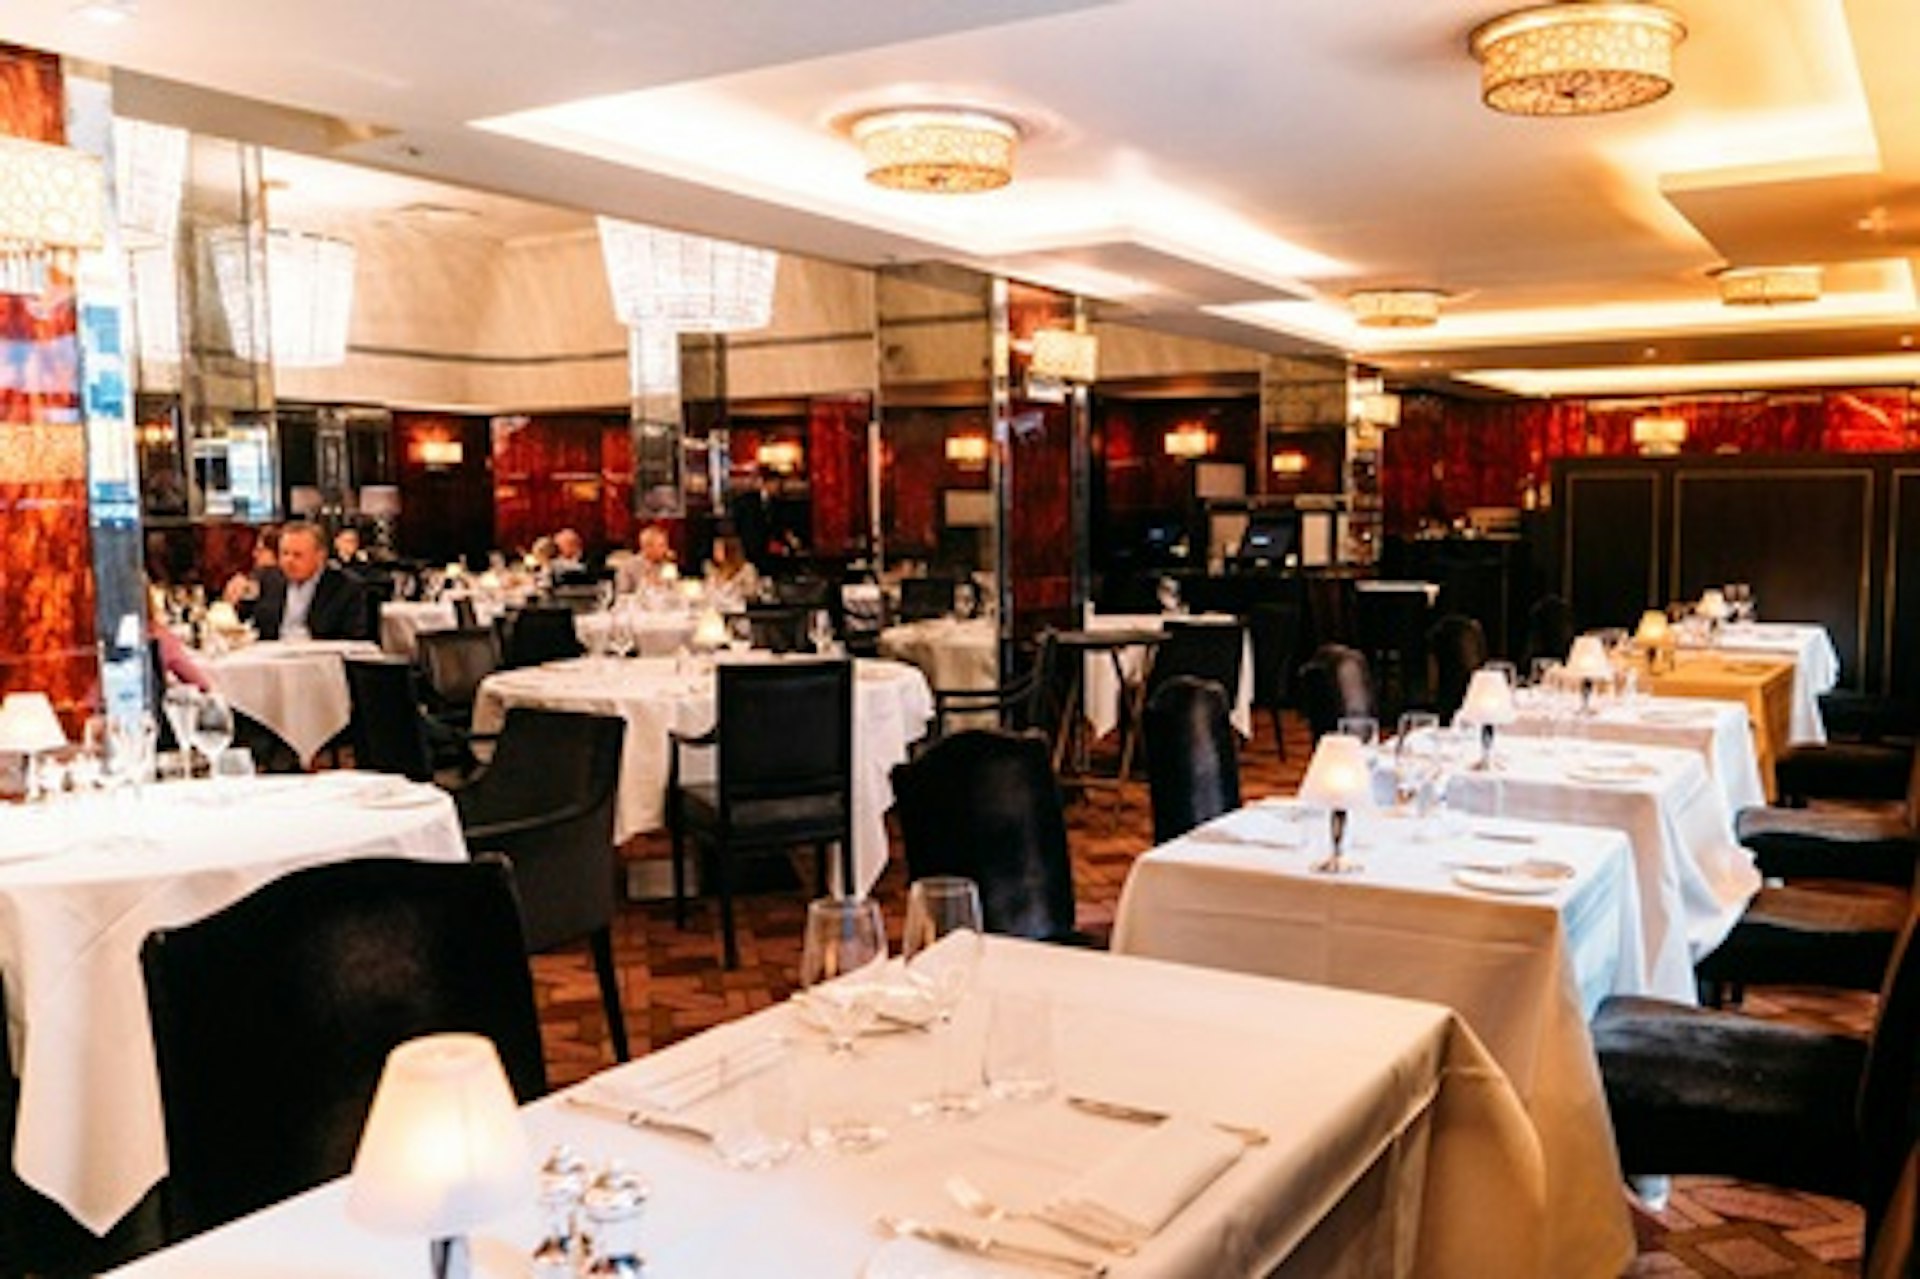 Three Course Lunch for Two at Gordon Ramsay's Savoy Grill 4